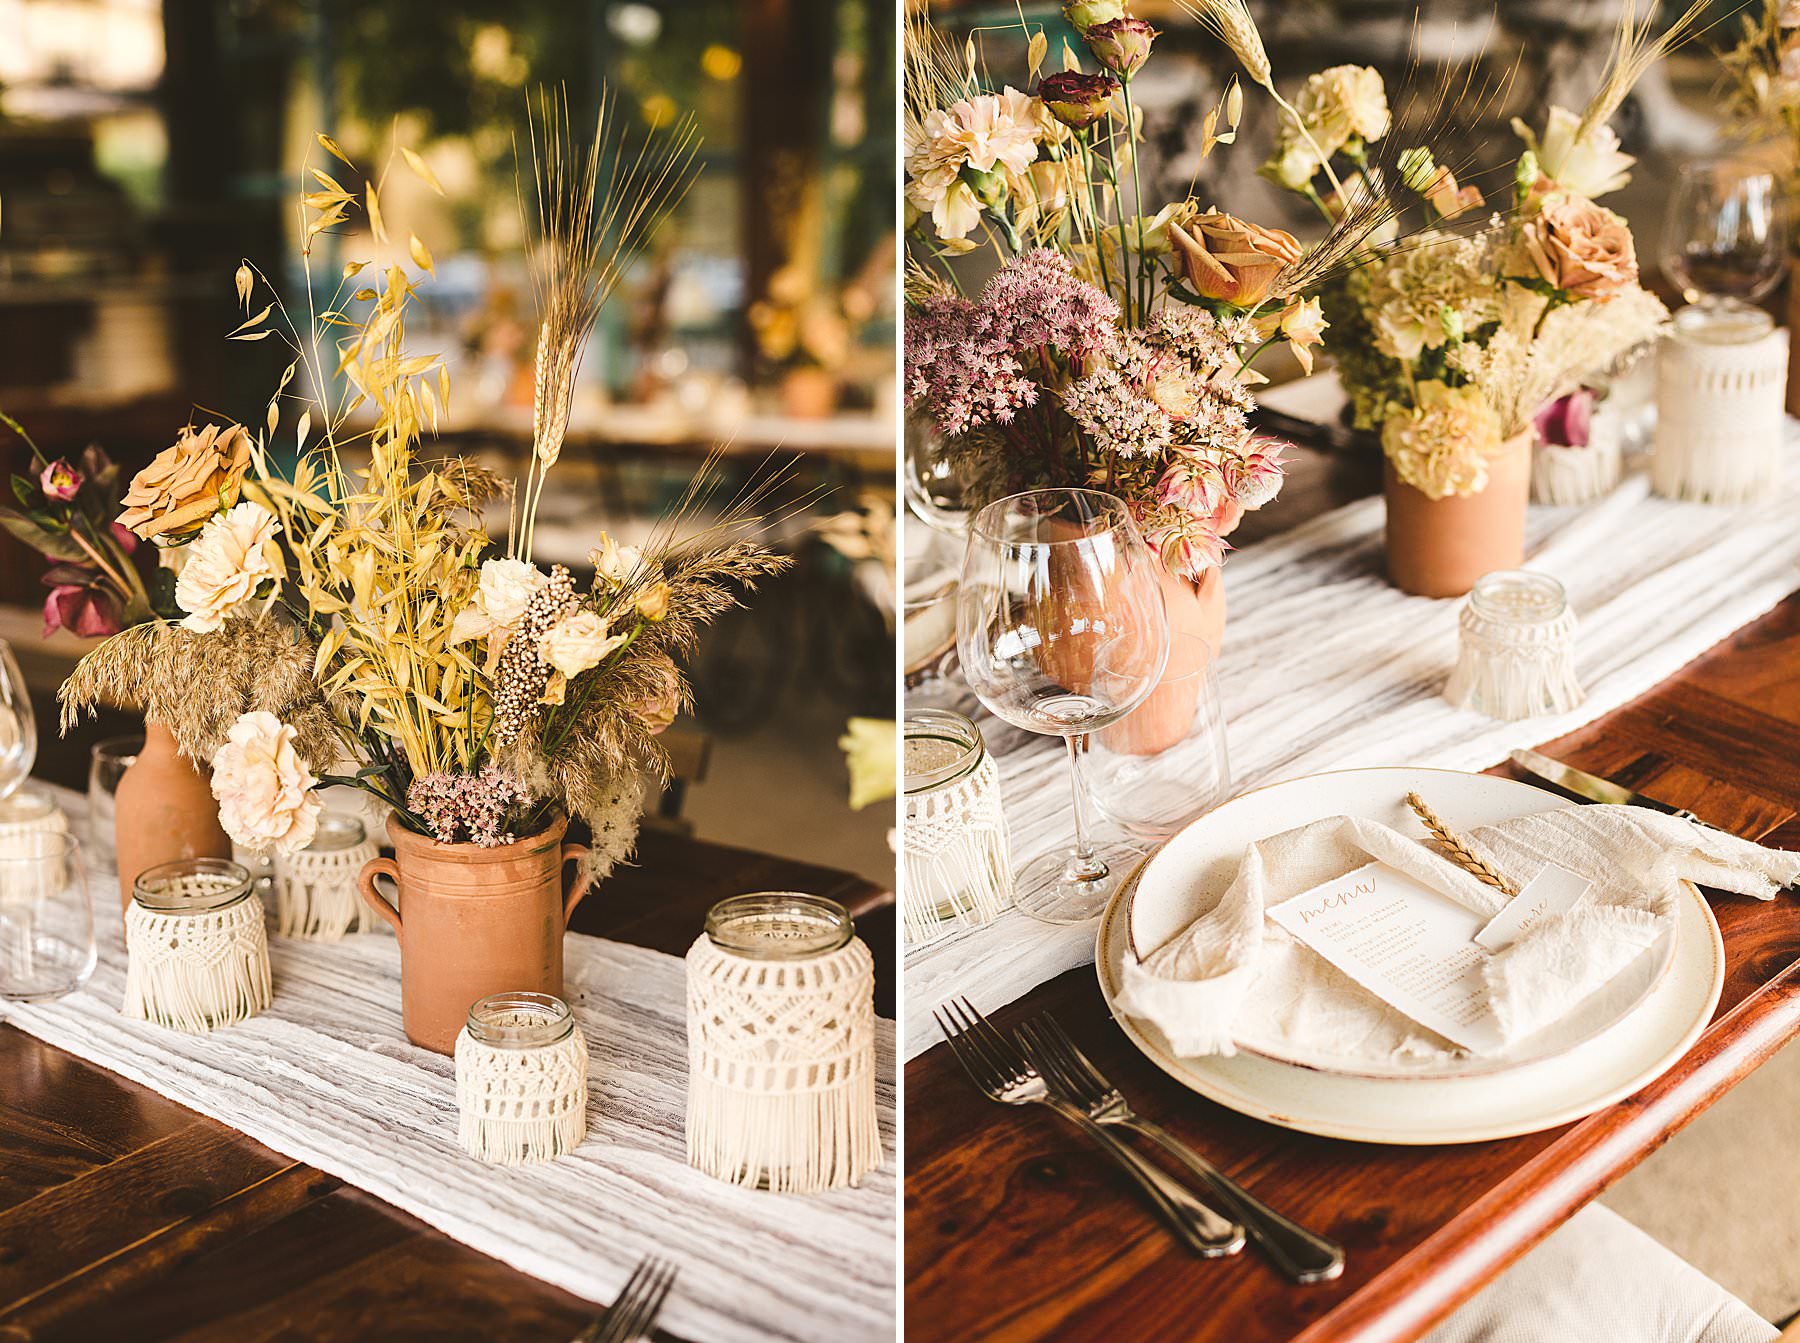 Elegant Italian bohemian chic wedding reception setup at Casa Masi in the heart of Tuscany. The setup design was delightful with the amazing macramé decorations and flowers